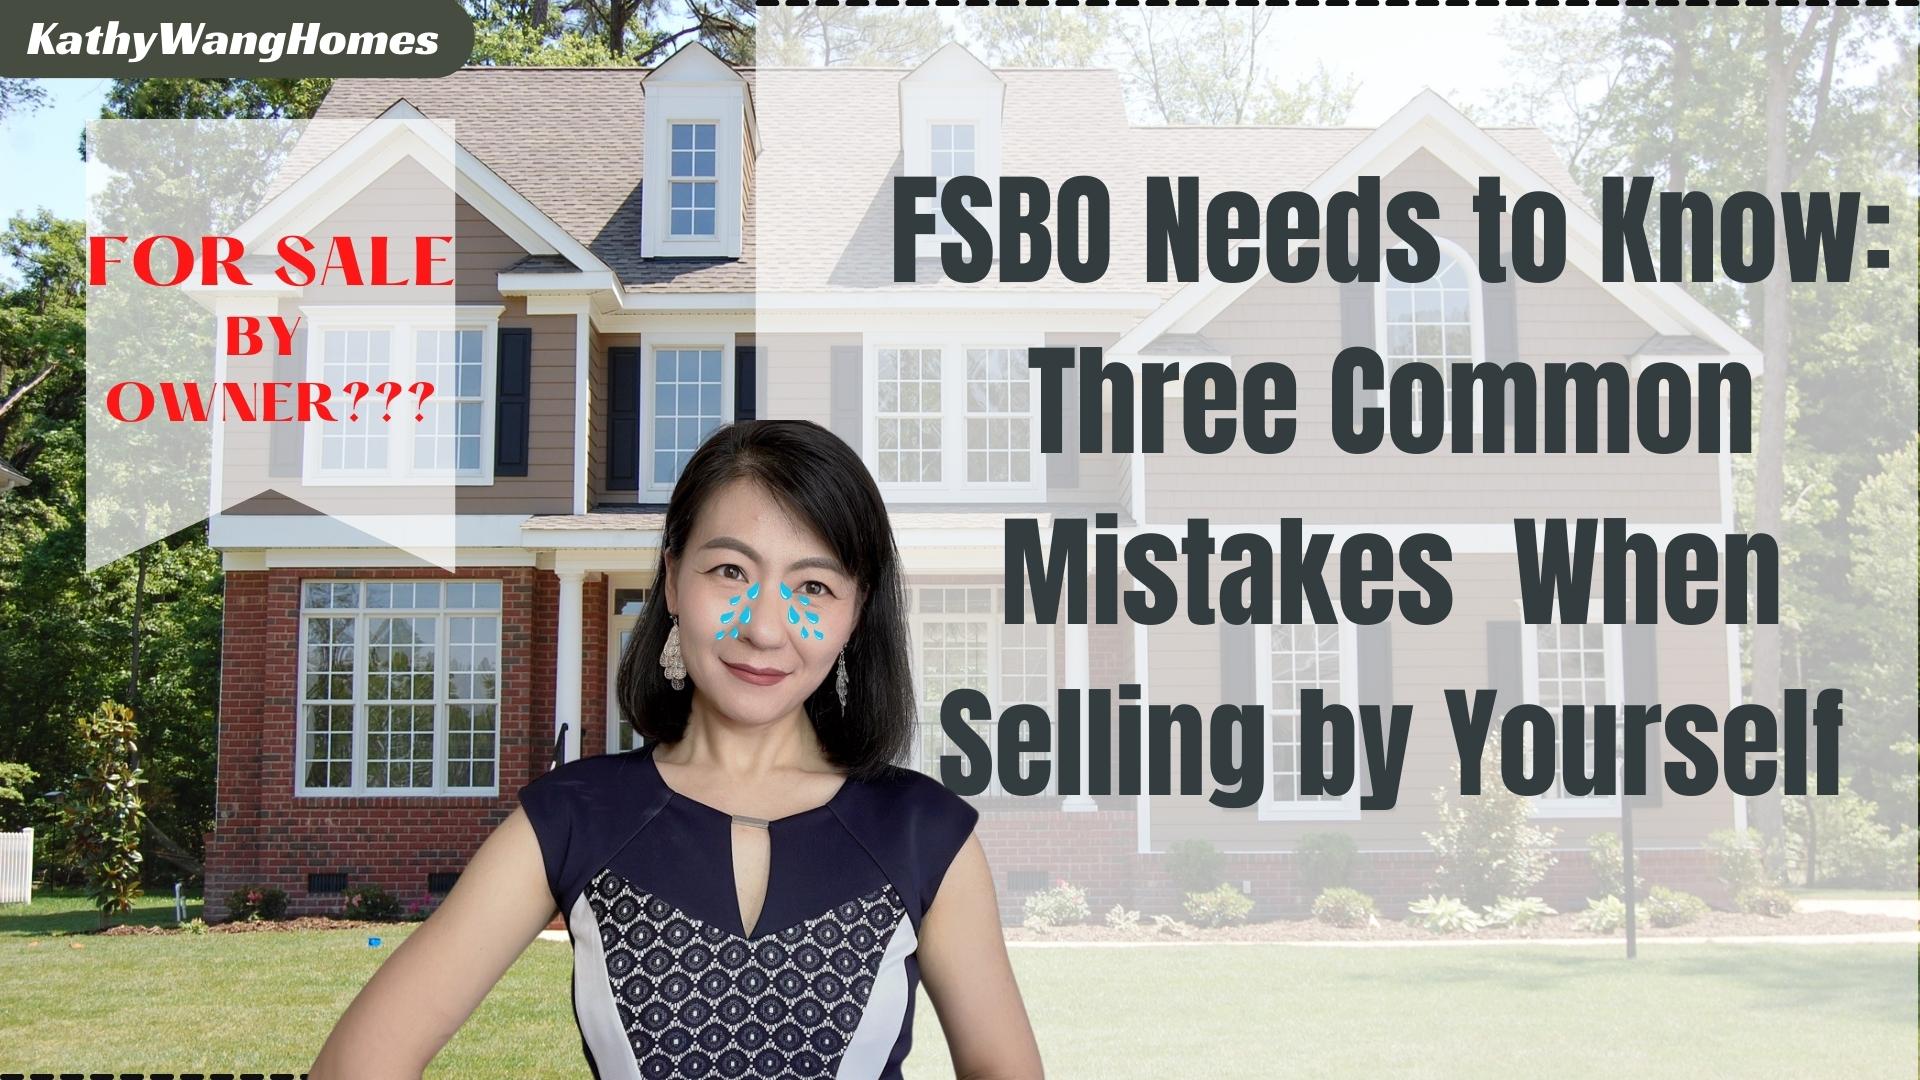 There are three common mistakes when selling a house by yourself (FSBO needs to know)